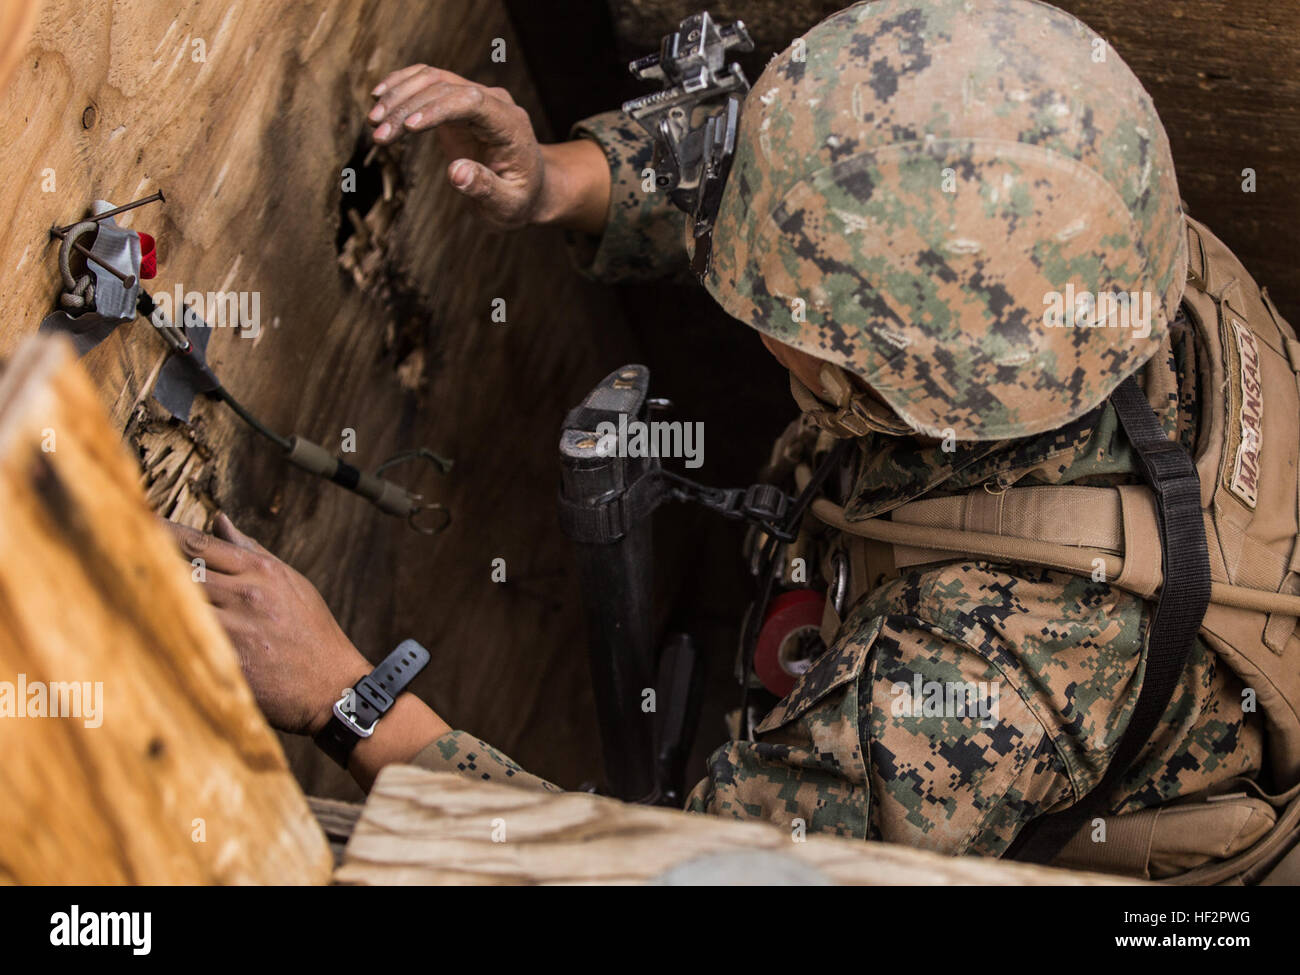 U.S. Marine Lance Cpl. Estelito Manansala places a donut charge during a combined arms exercise  aboard Marine Corps Air Ground Combat Center, Twentynine Palms, Calif., Dec. 15, 2014. Manansala is a combat engineer with Battalion Landing Team 3rd Battalion Team, 15th Marine Expeditionary Unit. BLT 3/1 conducted this training concurrent with the 15th MEU’s realistic urban training.  RUT prepares the 15th MEU’s Marines for their upcoming deployment, enhancing their combat skills in environments similar to those they may find in future missions. (U.S. Marine Corps Photo by Sgt. Emmanuel Ramos/Rel Stock Photo